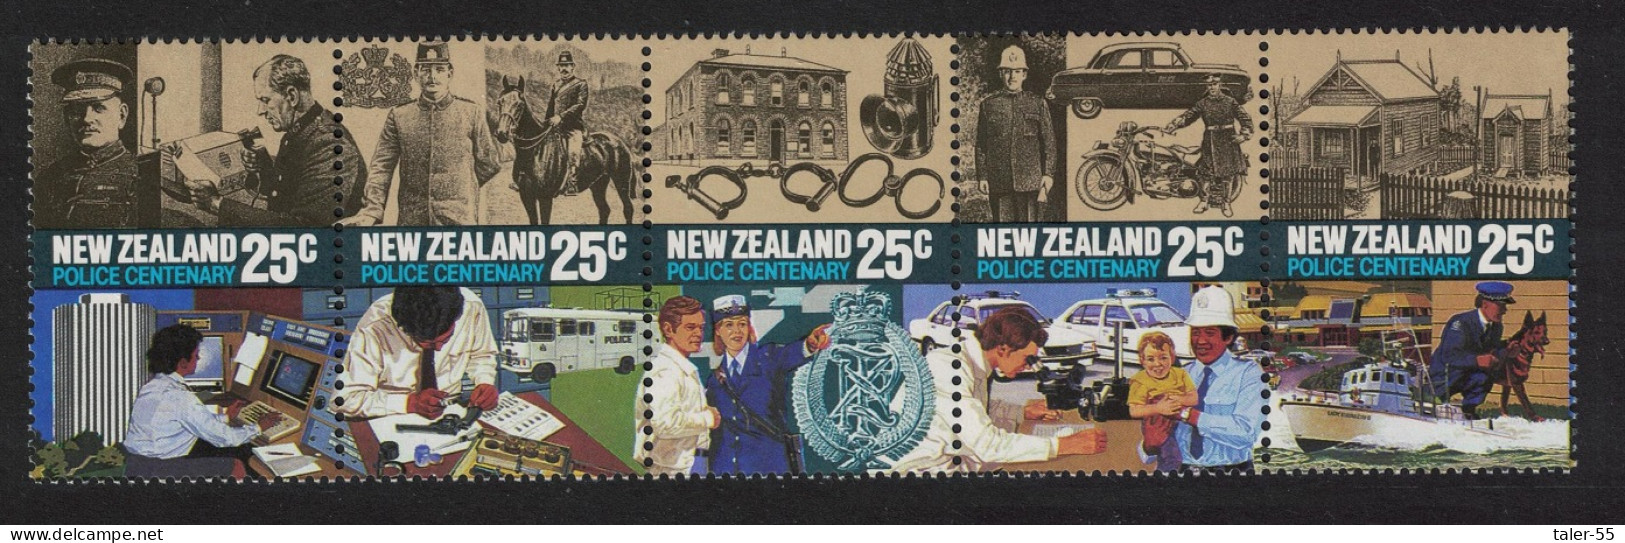 New Zealand Centenary Of Police 5v Strip 1986 MNH SG#1384-1388 - Unused Stamps